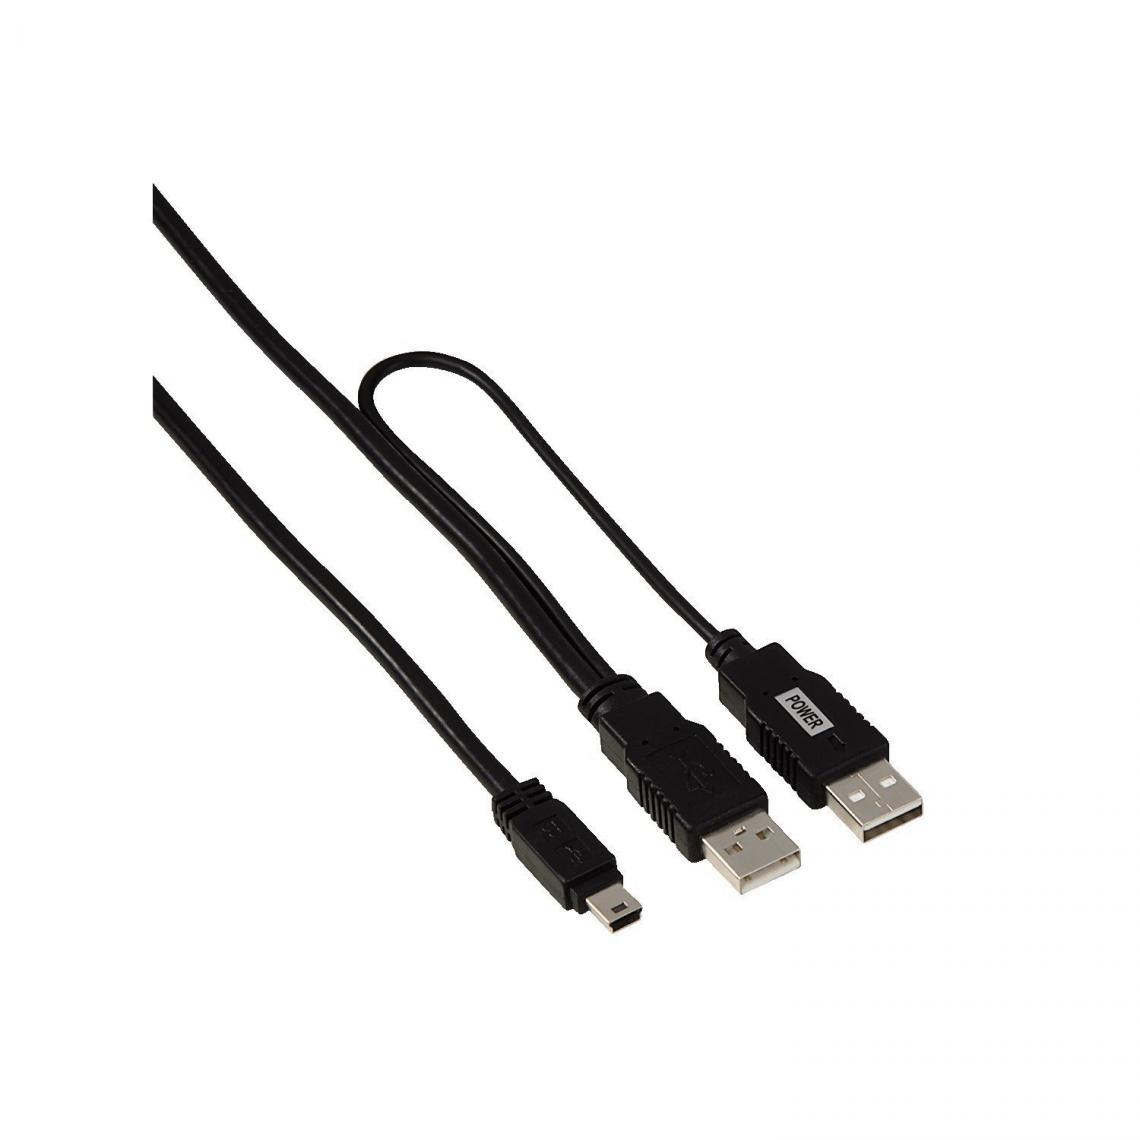 Ineck - INECK - Cable double USB 2.0 A male vers mini-B male 1m - Câble antenne